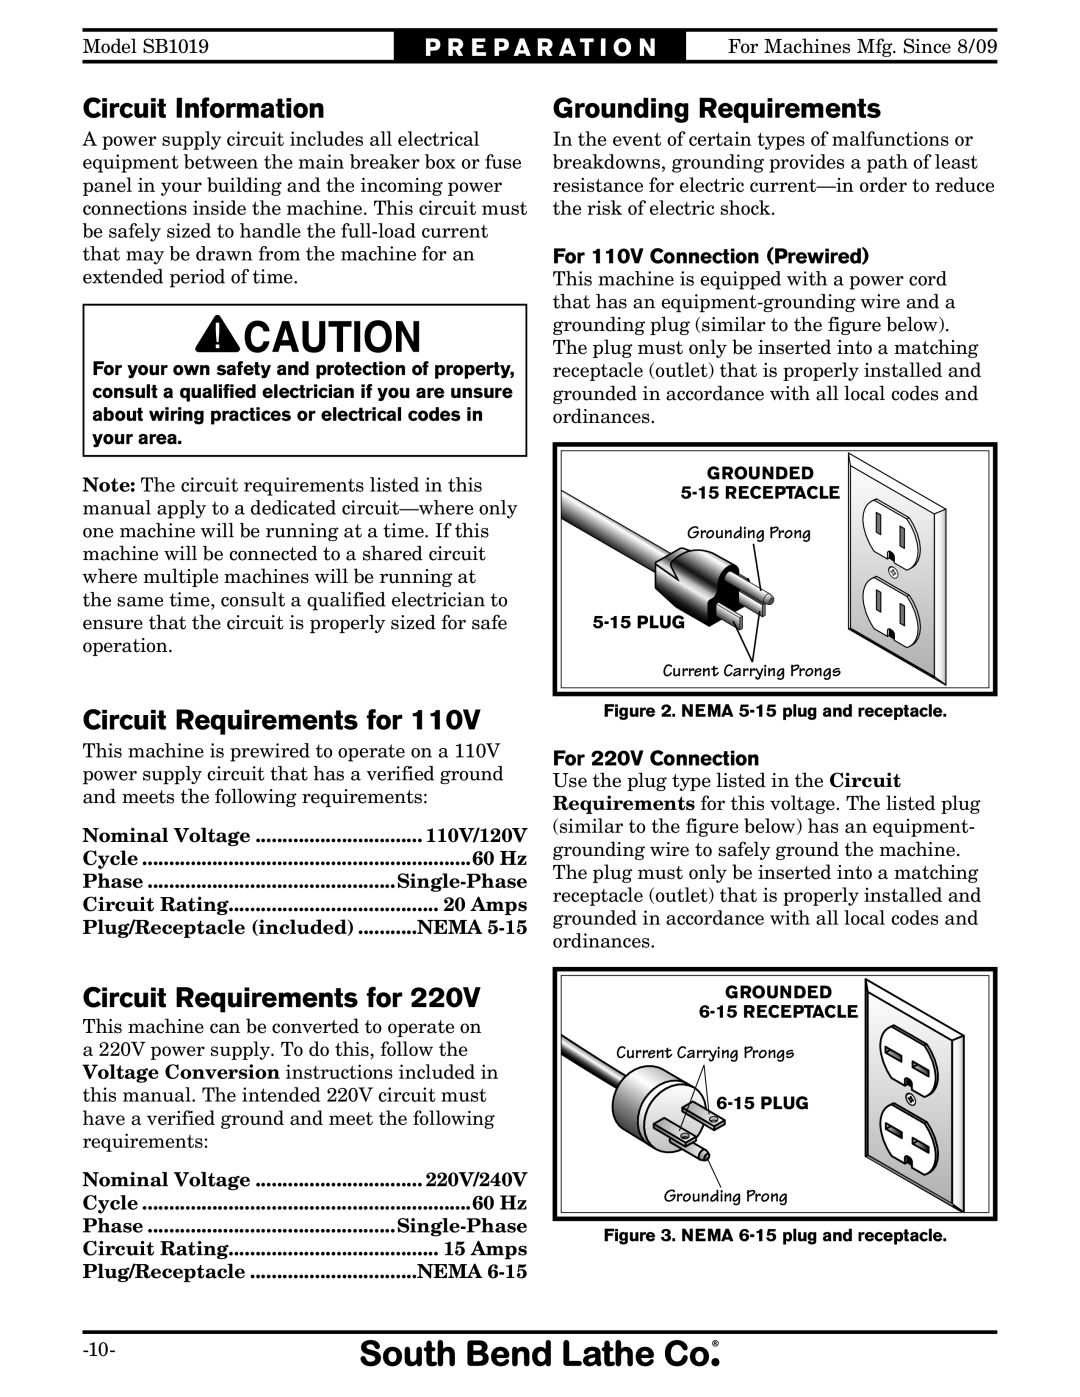 Southbend SB1019 Circuit Information, Circuit Requirements for, Grounding Requirements, For 110V Connection Prewired, Amps 